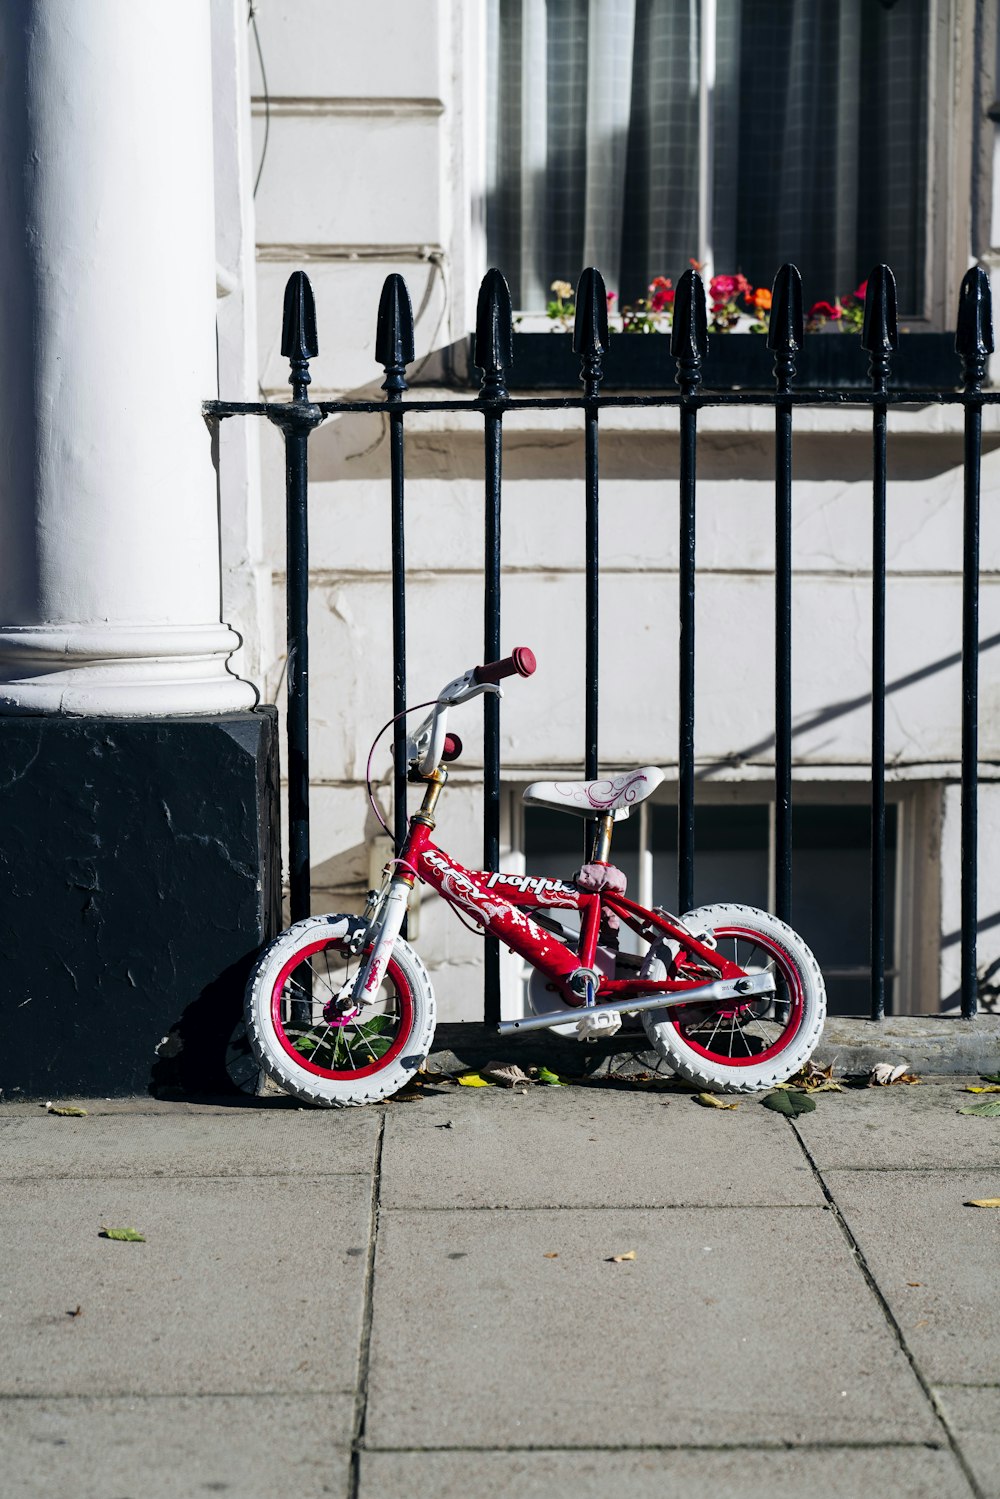 BMX bike parked beside fence and building during day